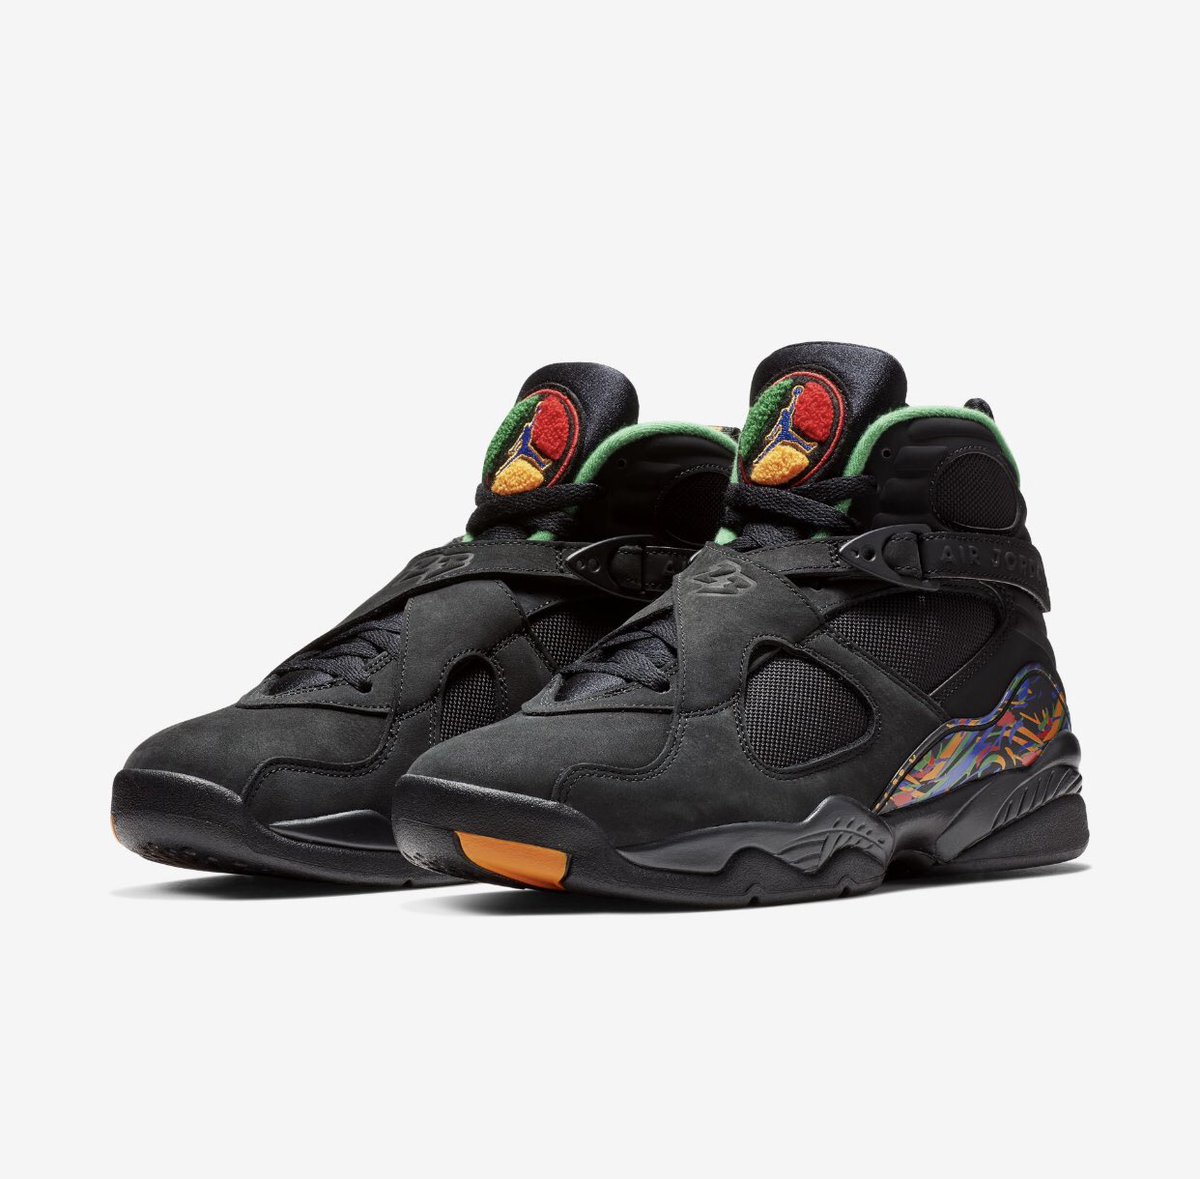 jordan 8 that come out in december